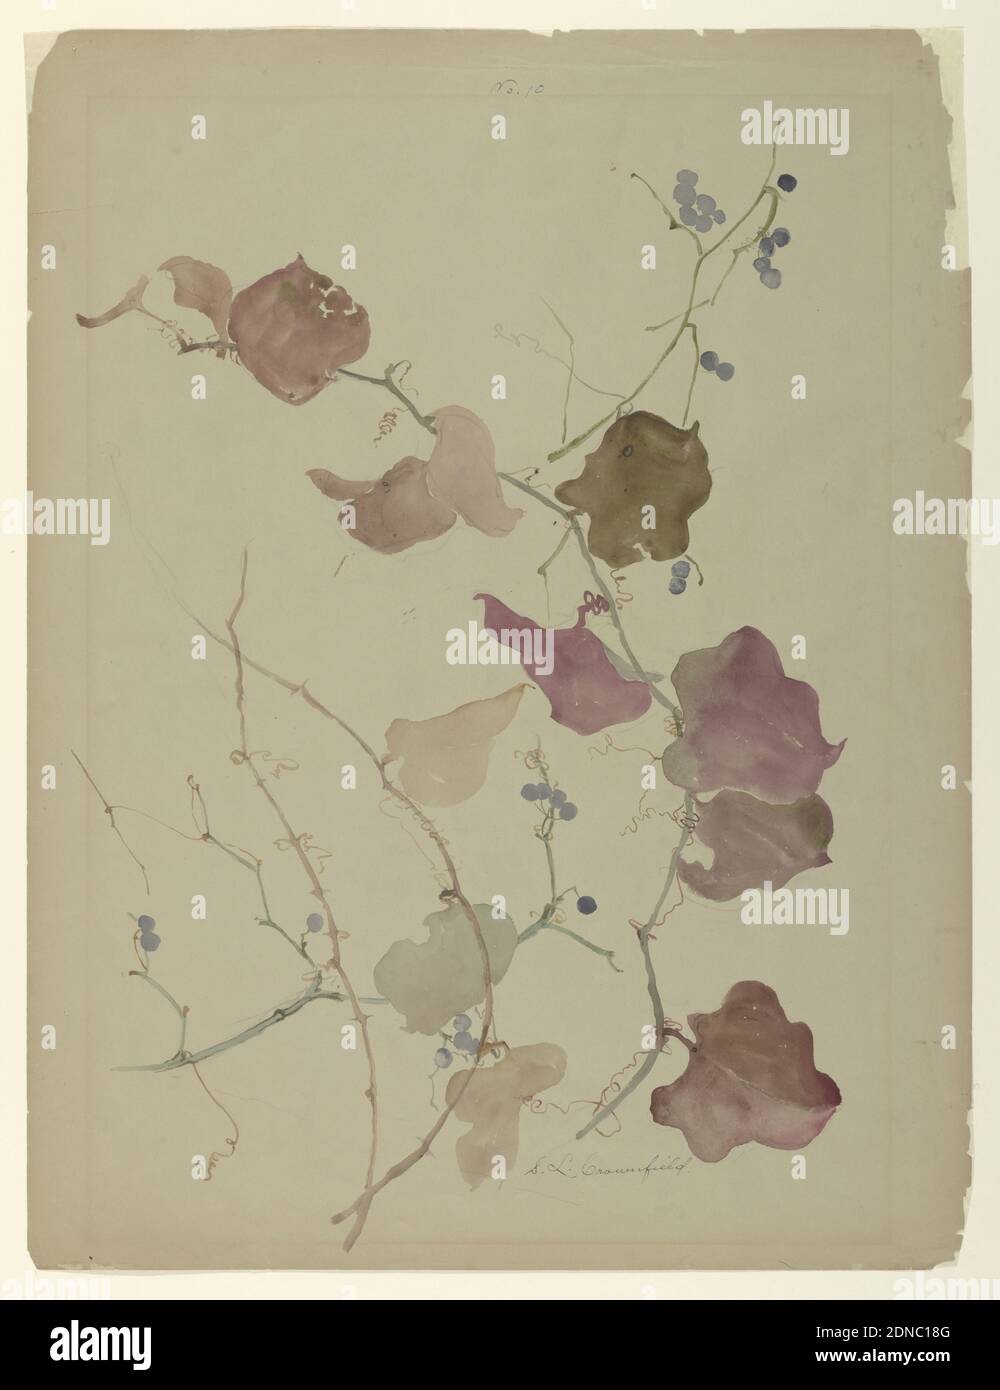 Study of Clematis Vine with Blue Berries, Sophia L. Crownfield, (American, 1862–1929), Brush and watercolor on gray paper, Vertical sheet depicting branches of clematis vines, with leaves in autumnal coloring, and blue berries., USA, early 20th century, nature studies, Drawing Stock Photo